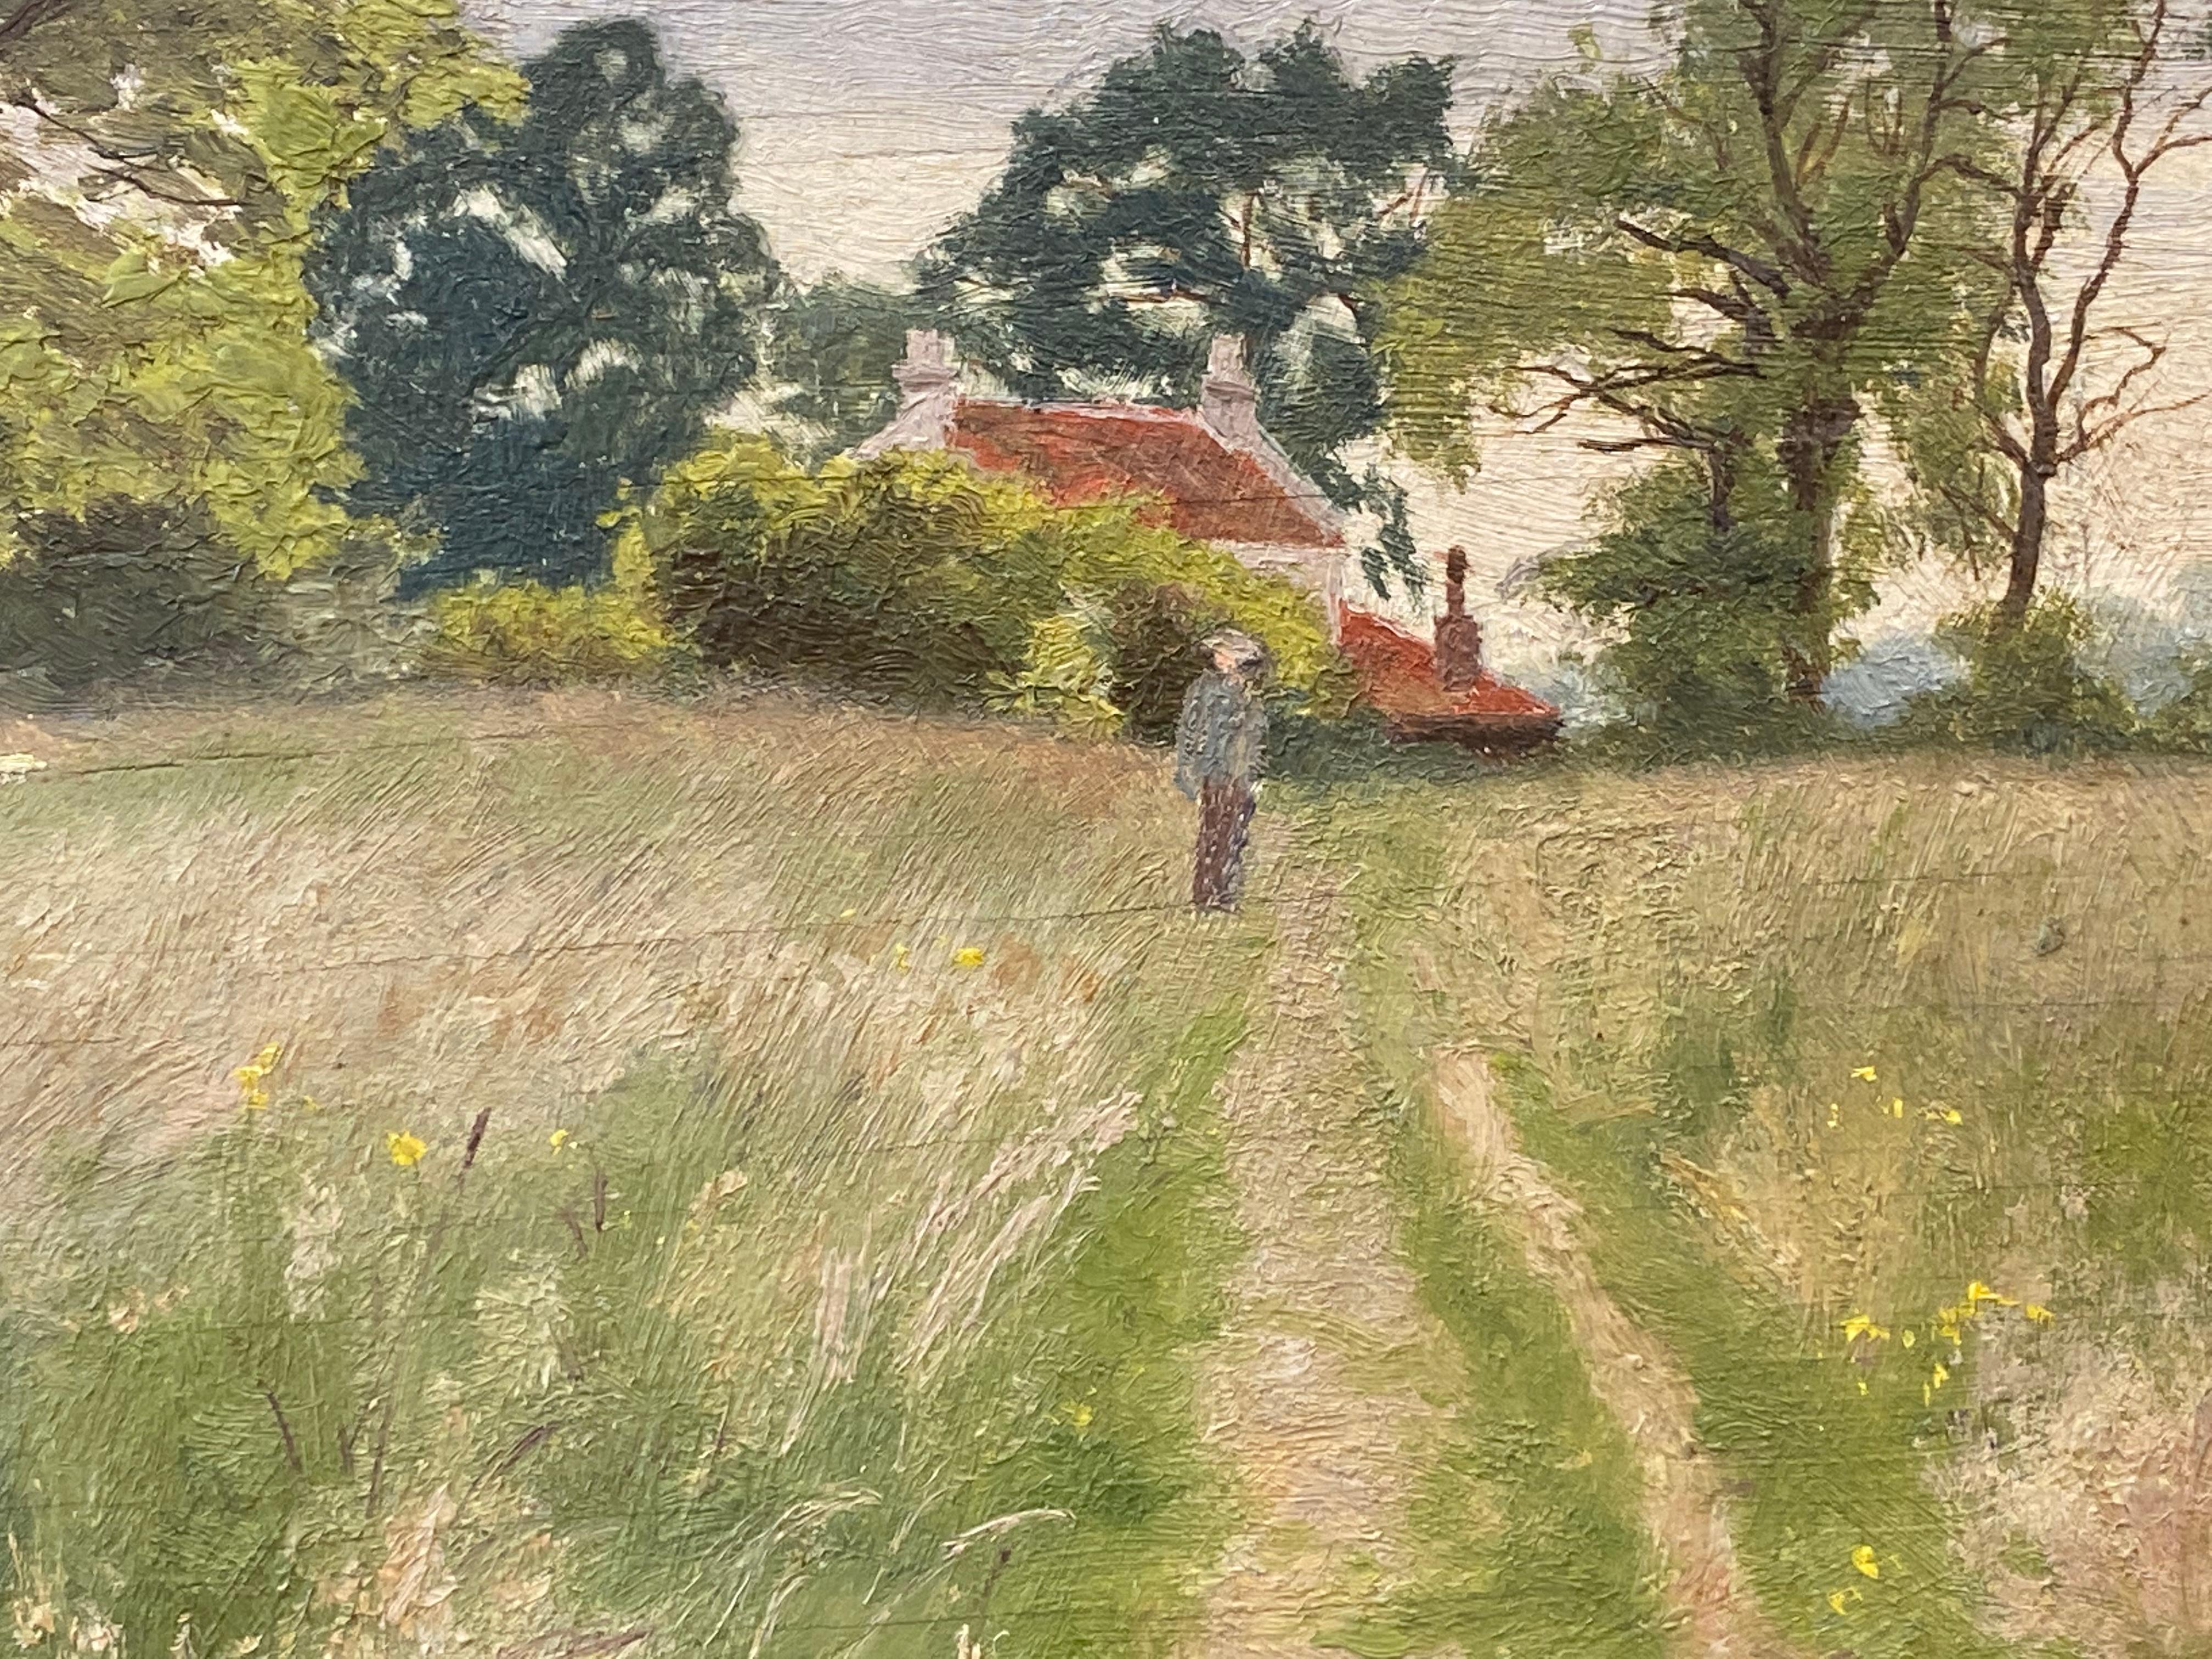 Artist/ School: French School,  early 20th century

Title: Hendon Fields

Medium: oil painting on board, unframed and inscribed verso

painting: 7 x 9.5 inches

Provenance: private collection, France

Condition: The painting is in overall very good